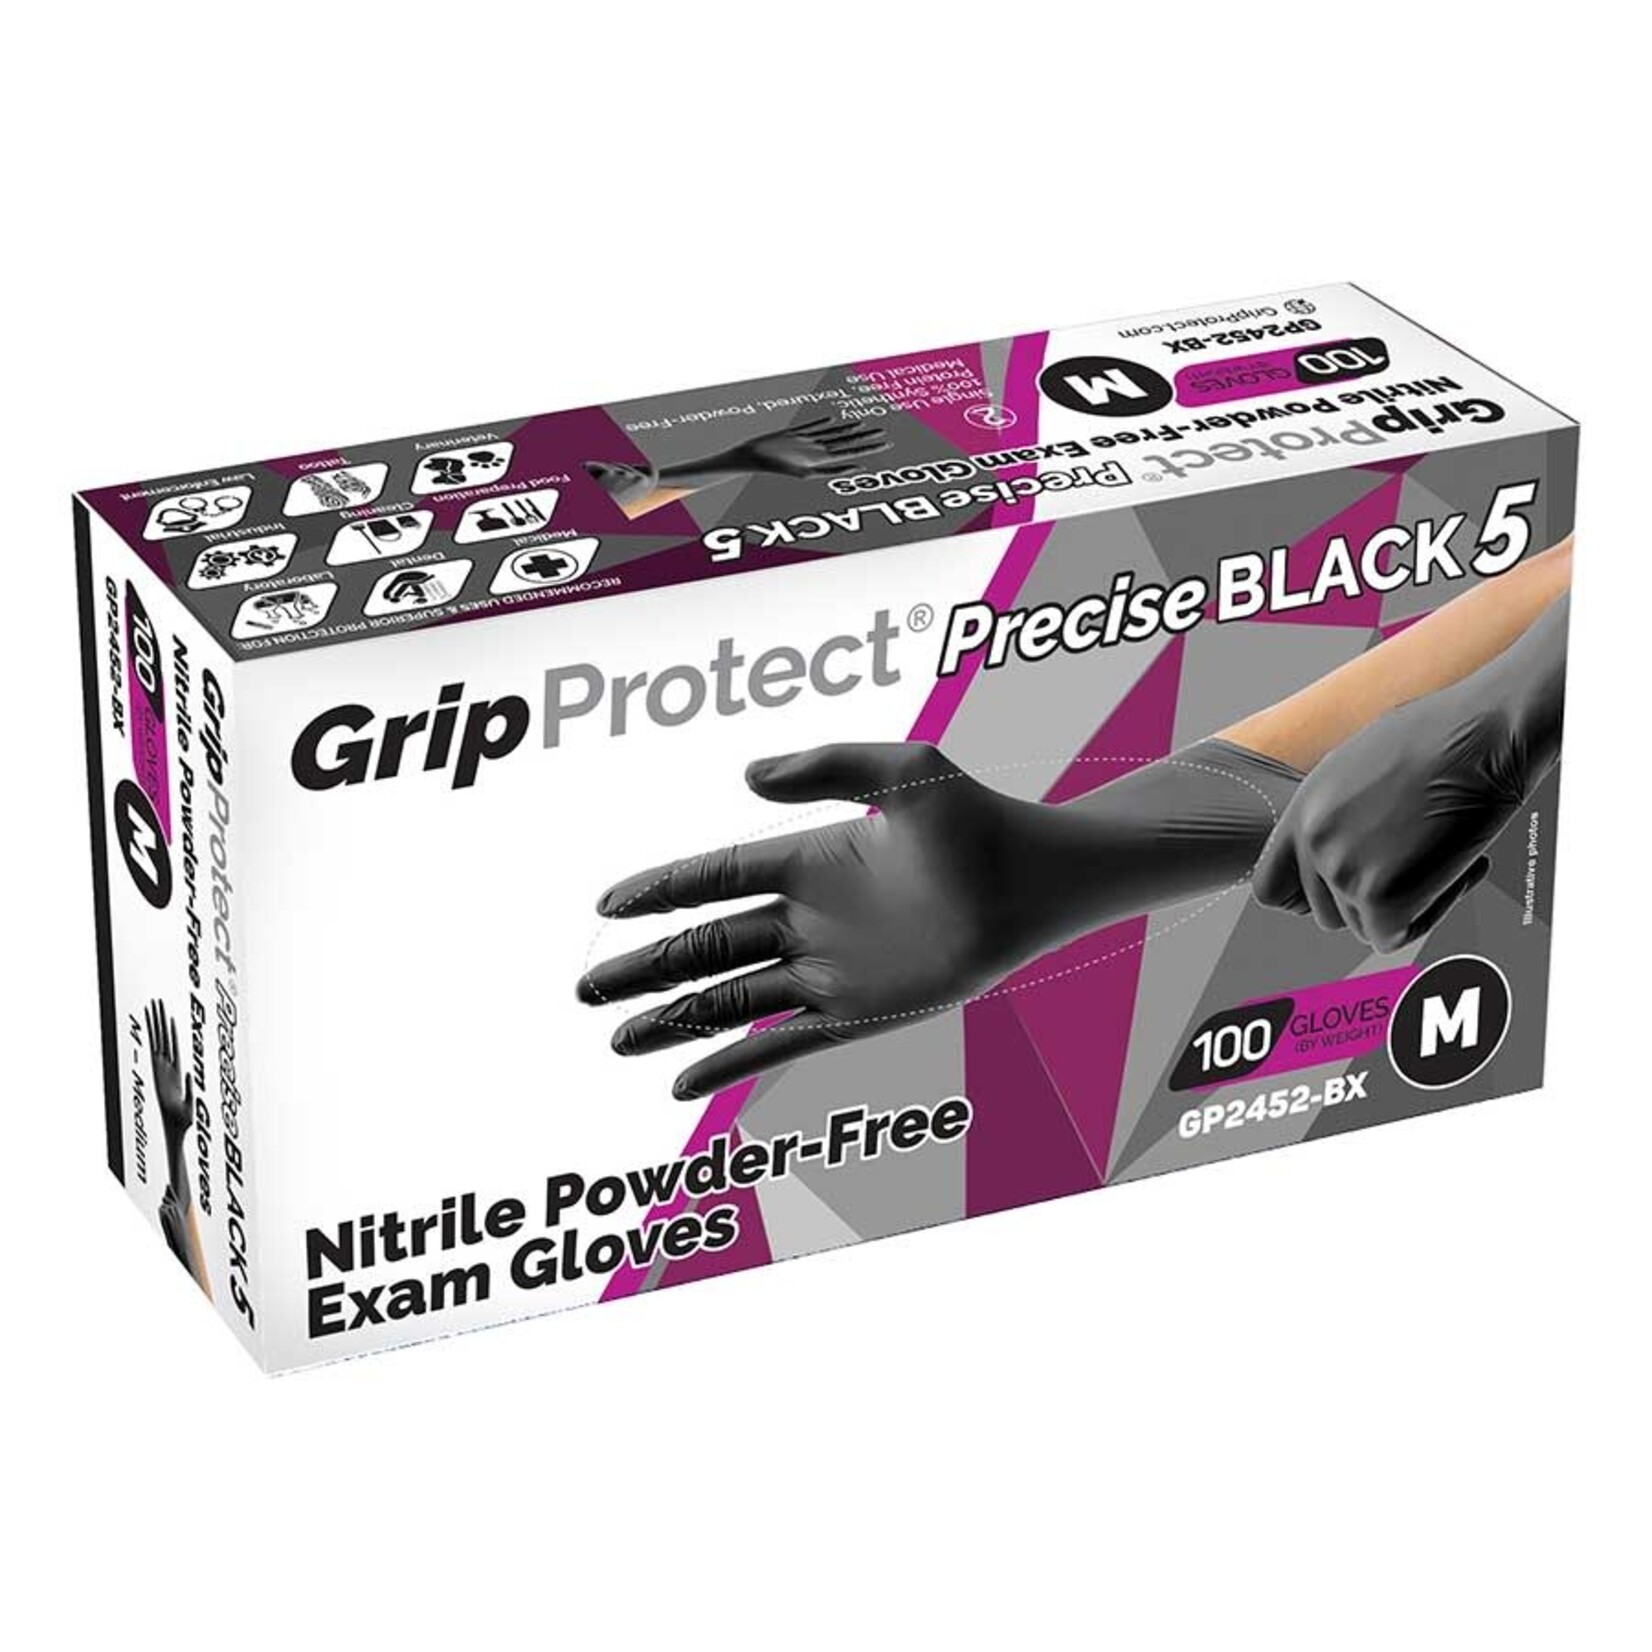 BMC Protect GripProtect Precise BLACK 5 Nitrile Powder-Free Exam Gloves, S (Case of 10 Boxes)